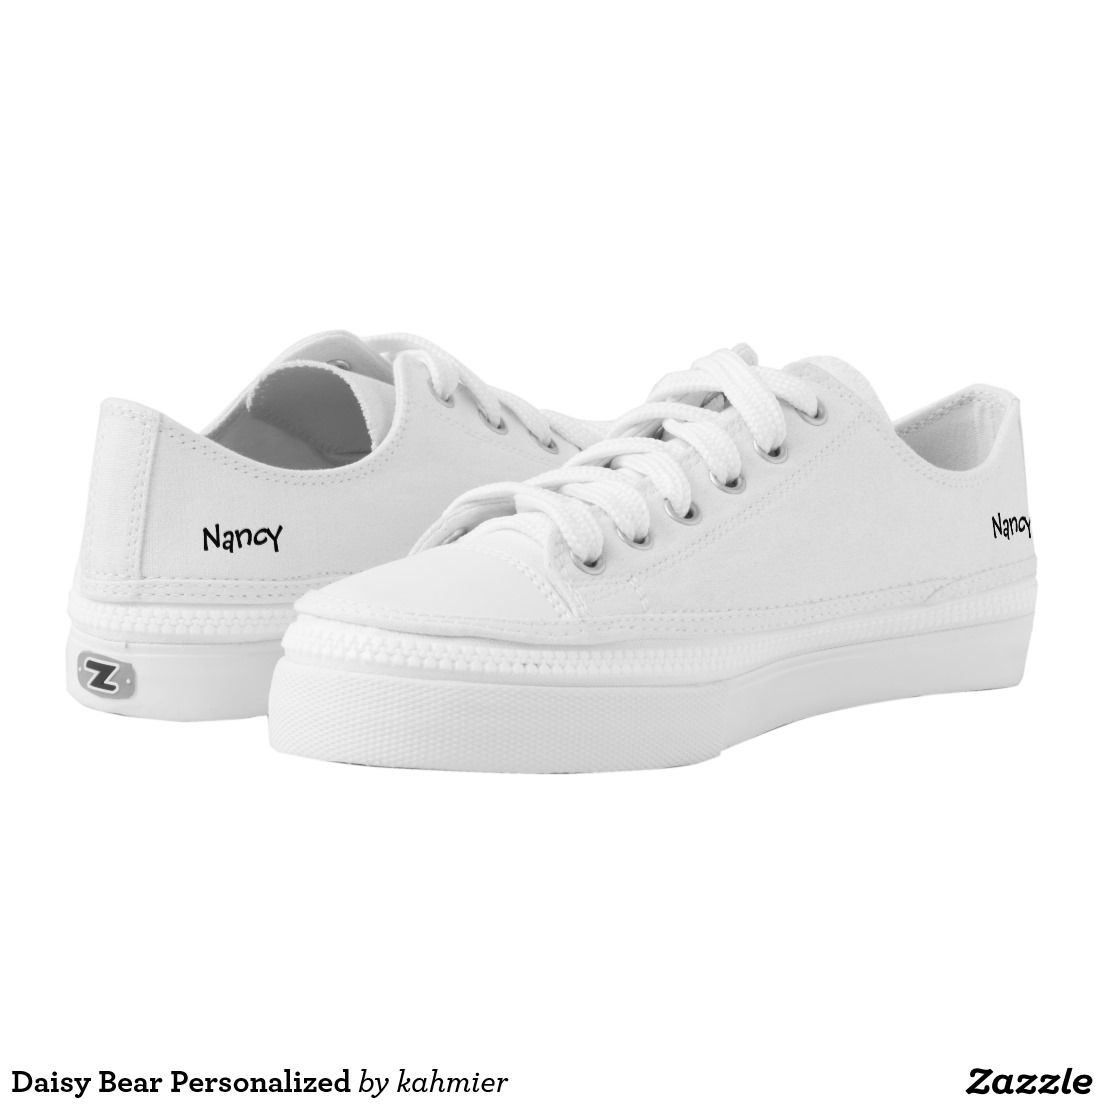 Daisy Bear Personalized Low-Top Sneakers